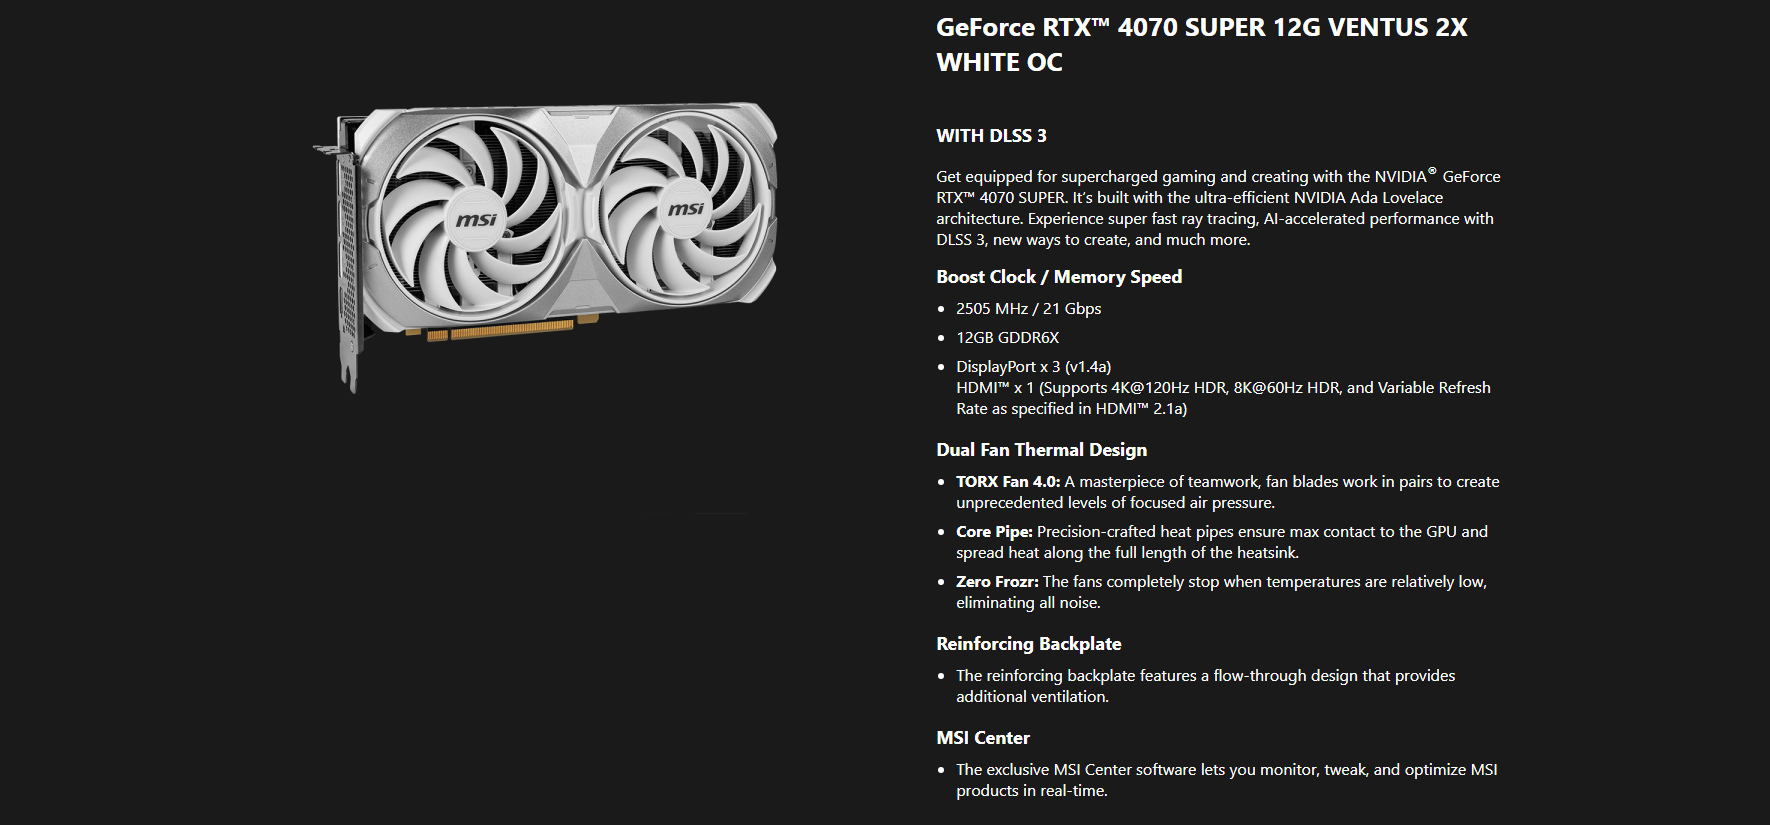 A large marketing image providing additional information about the product MSI GeForce RTX 4070 SUPER Ventus 2X OC 12GB GDDR6X - White - Additional alt info not provided